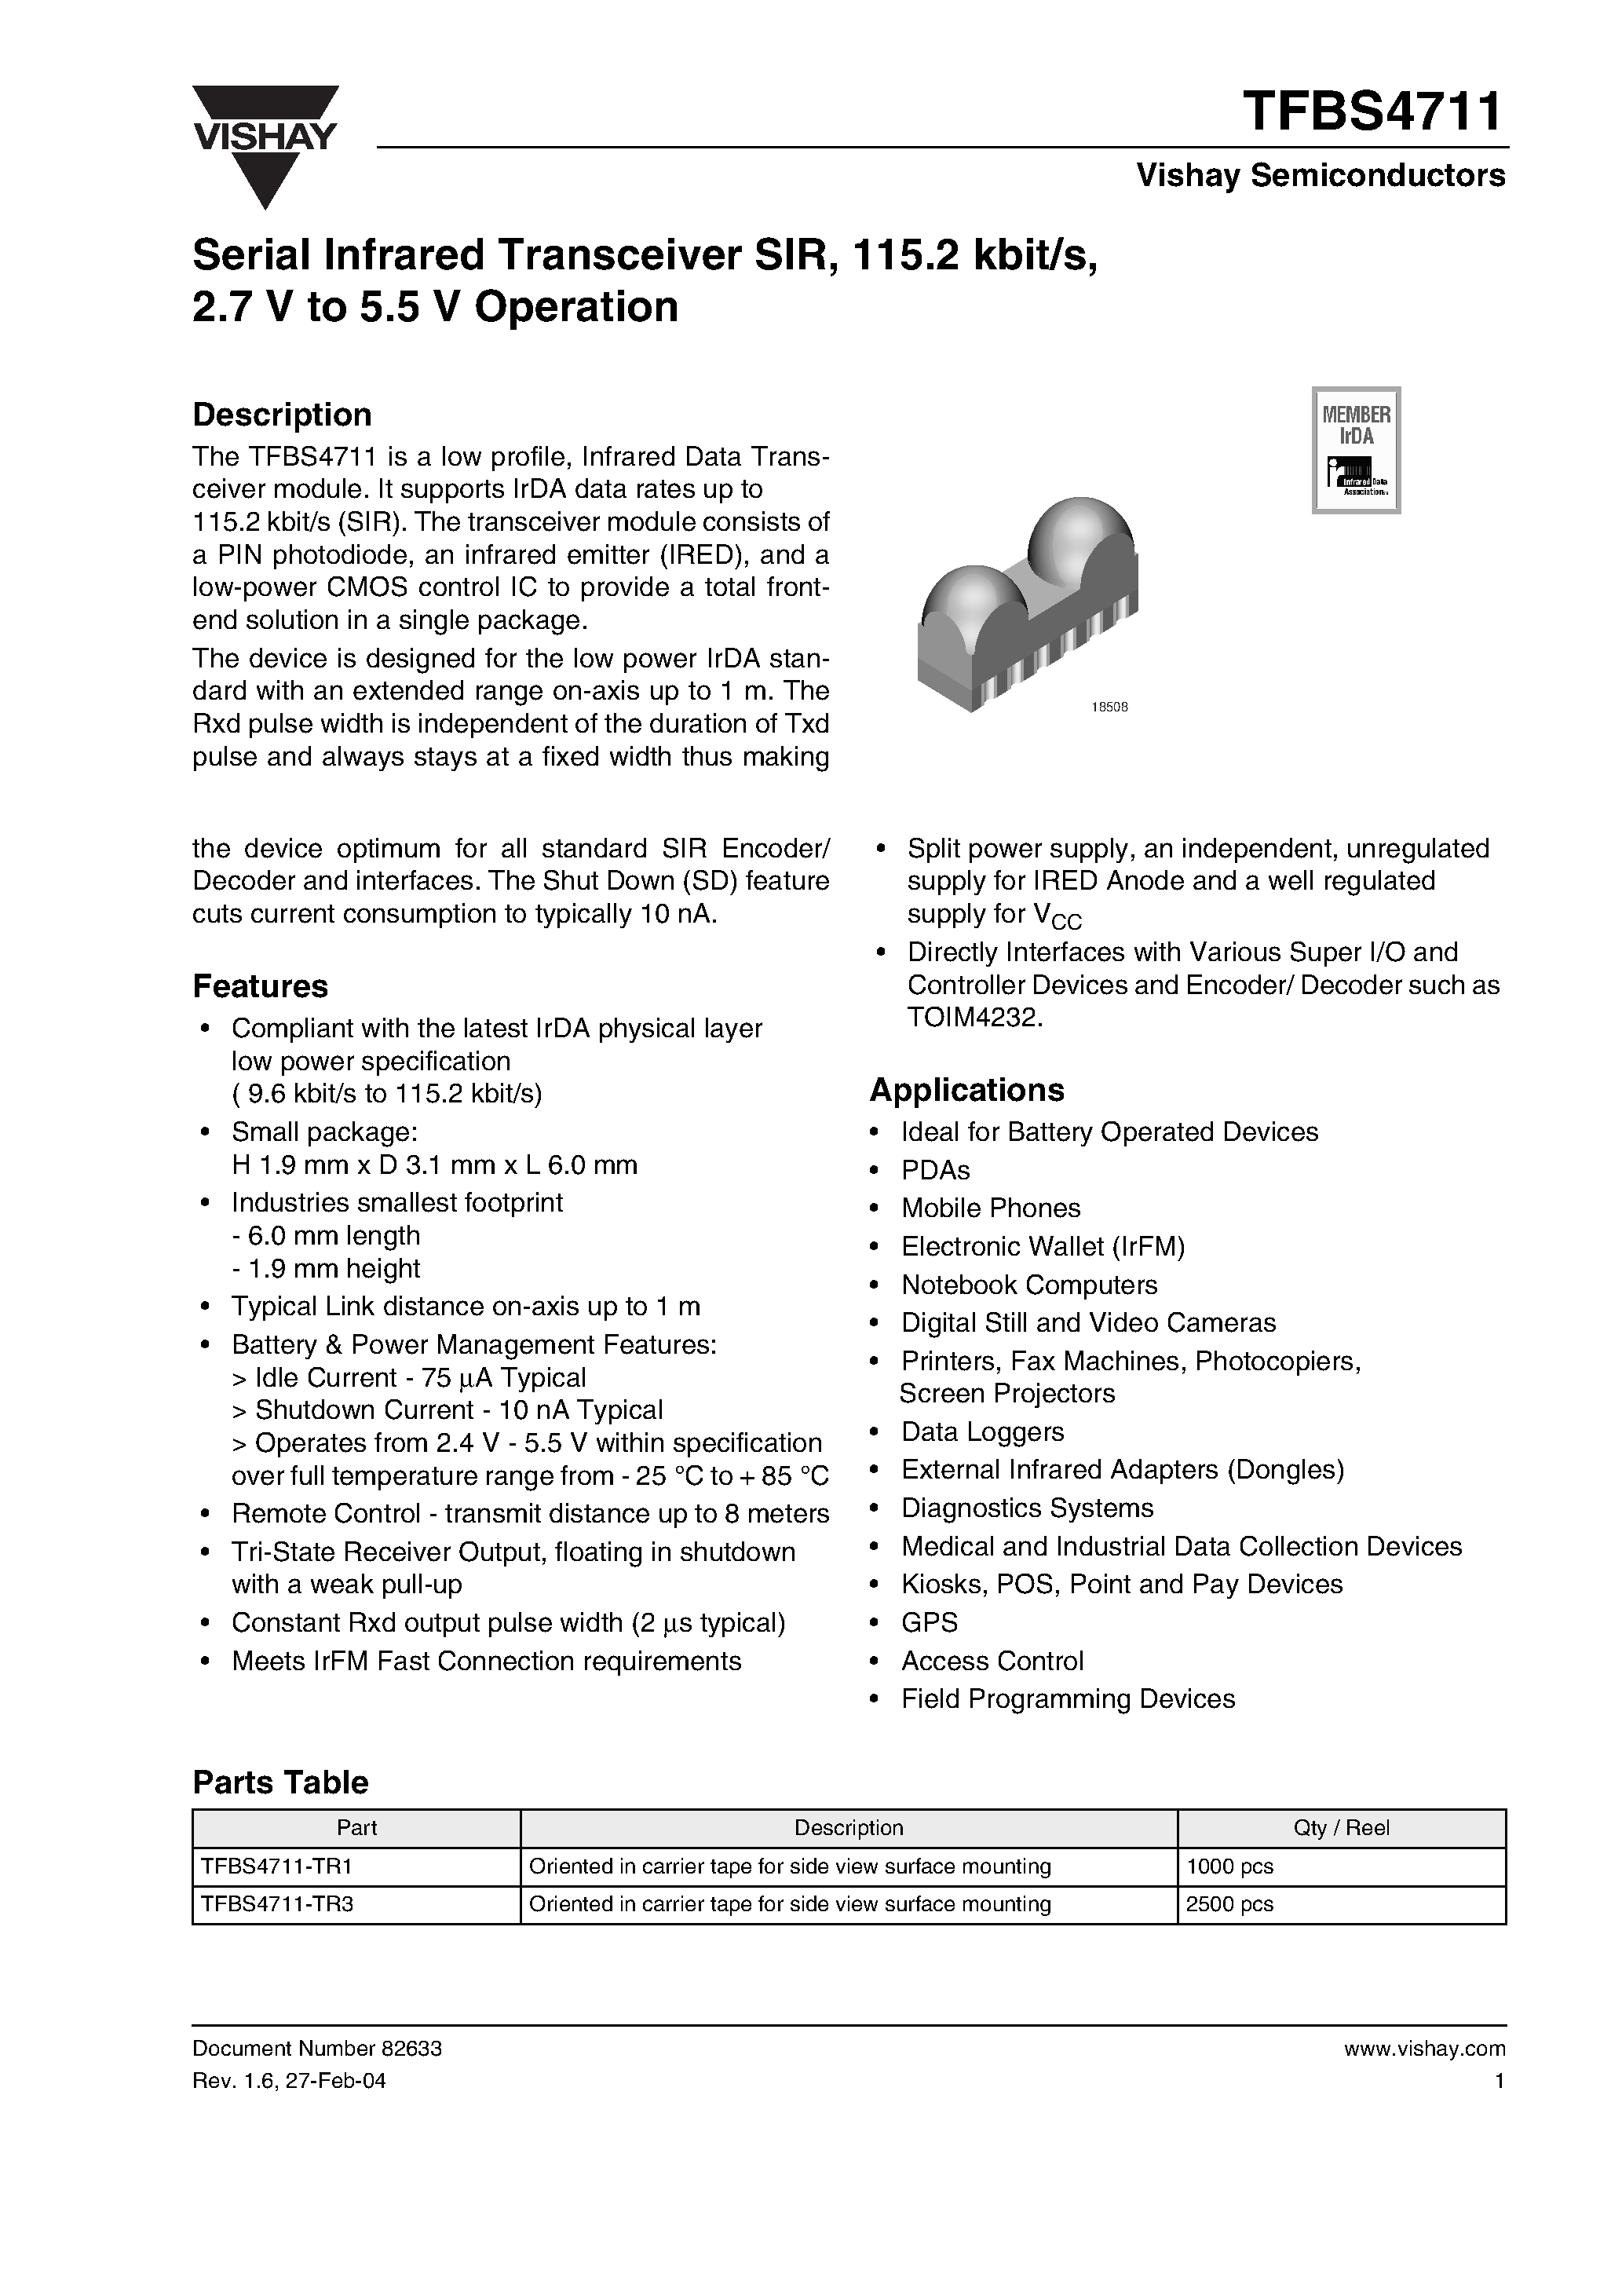 Datasheet TFBS4711 - Serial Infrared Transceiver SIR/ 115.2 kbit/s/ 2.7 V to 5.5 V Operation page 1